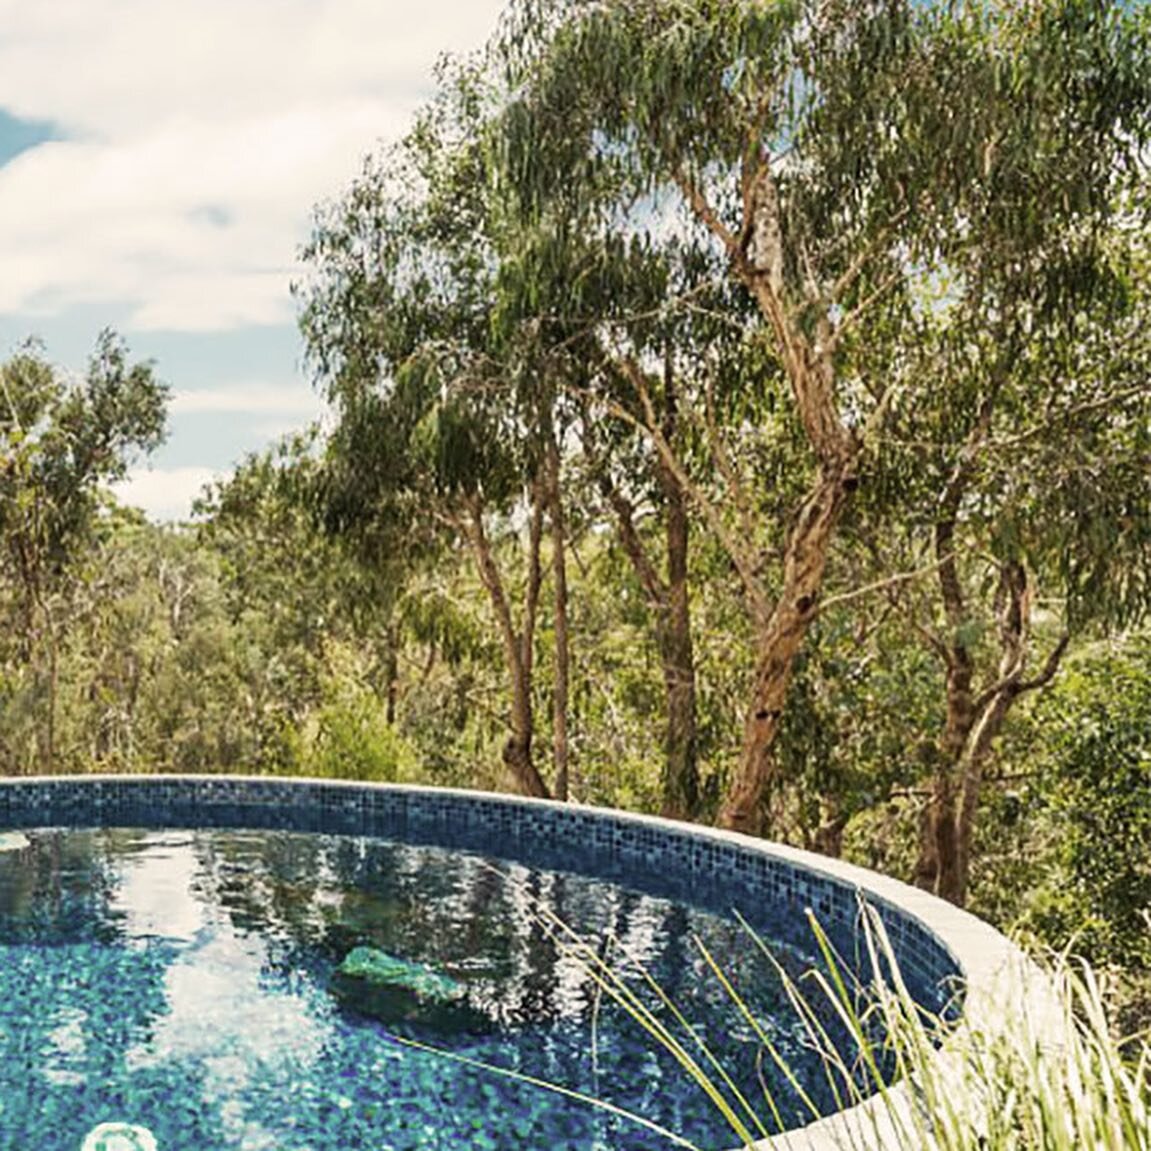 &bull; Warrandyte &bull; This project makes a stunning statement and maximises the available space with a circular plunge pool. 

We repeated the pool shape throughout the landscape and the use of a cohesive blend of natural materials, including rock